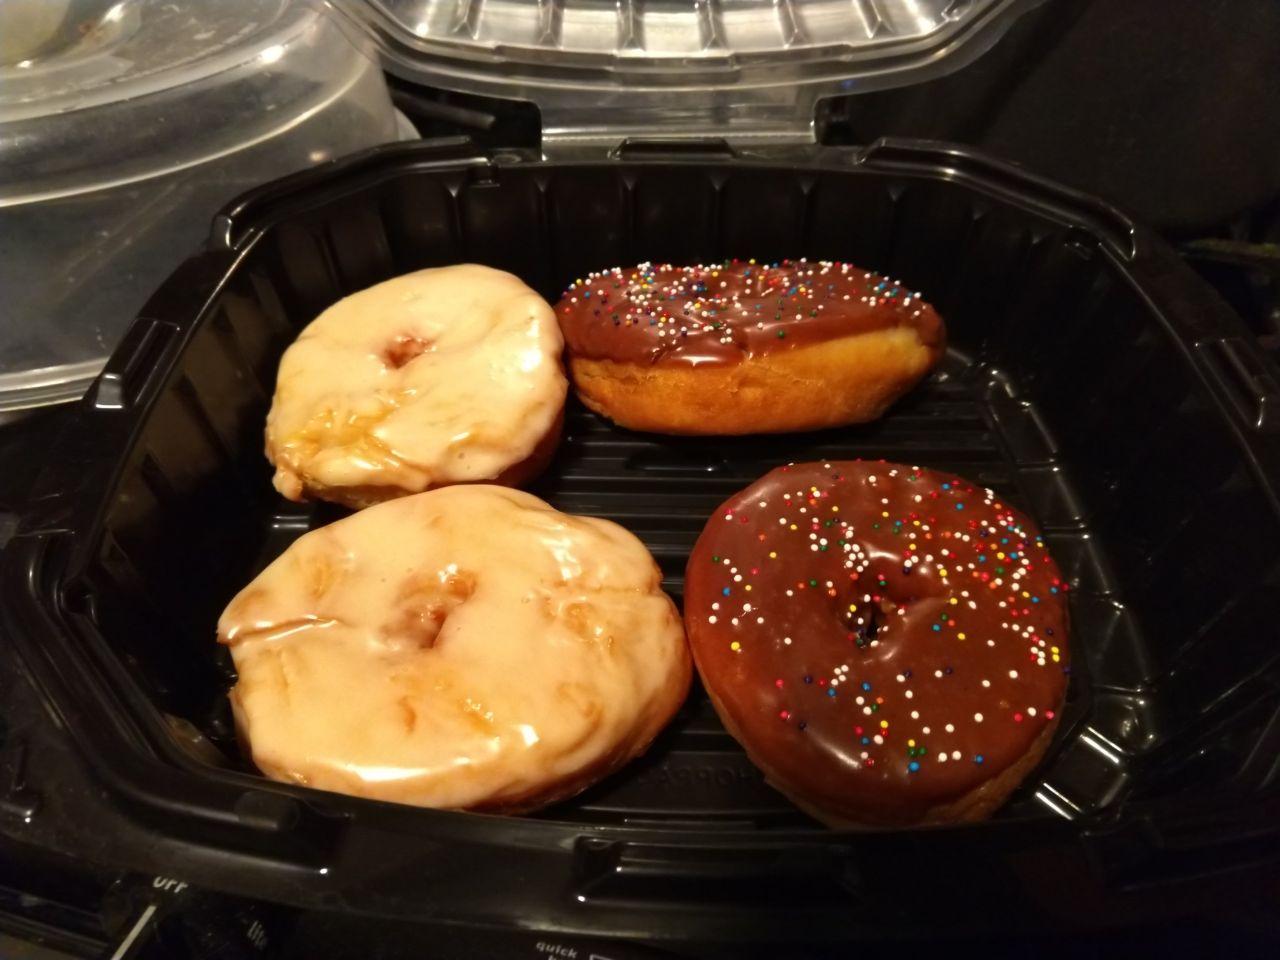 Homemade donuts with different kinds of glaze.